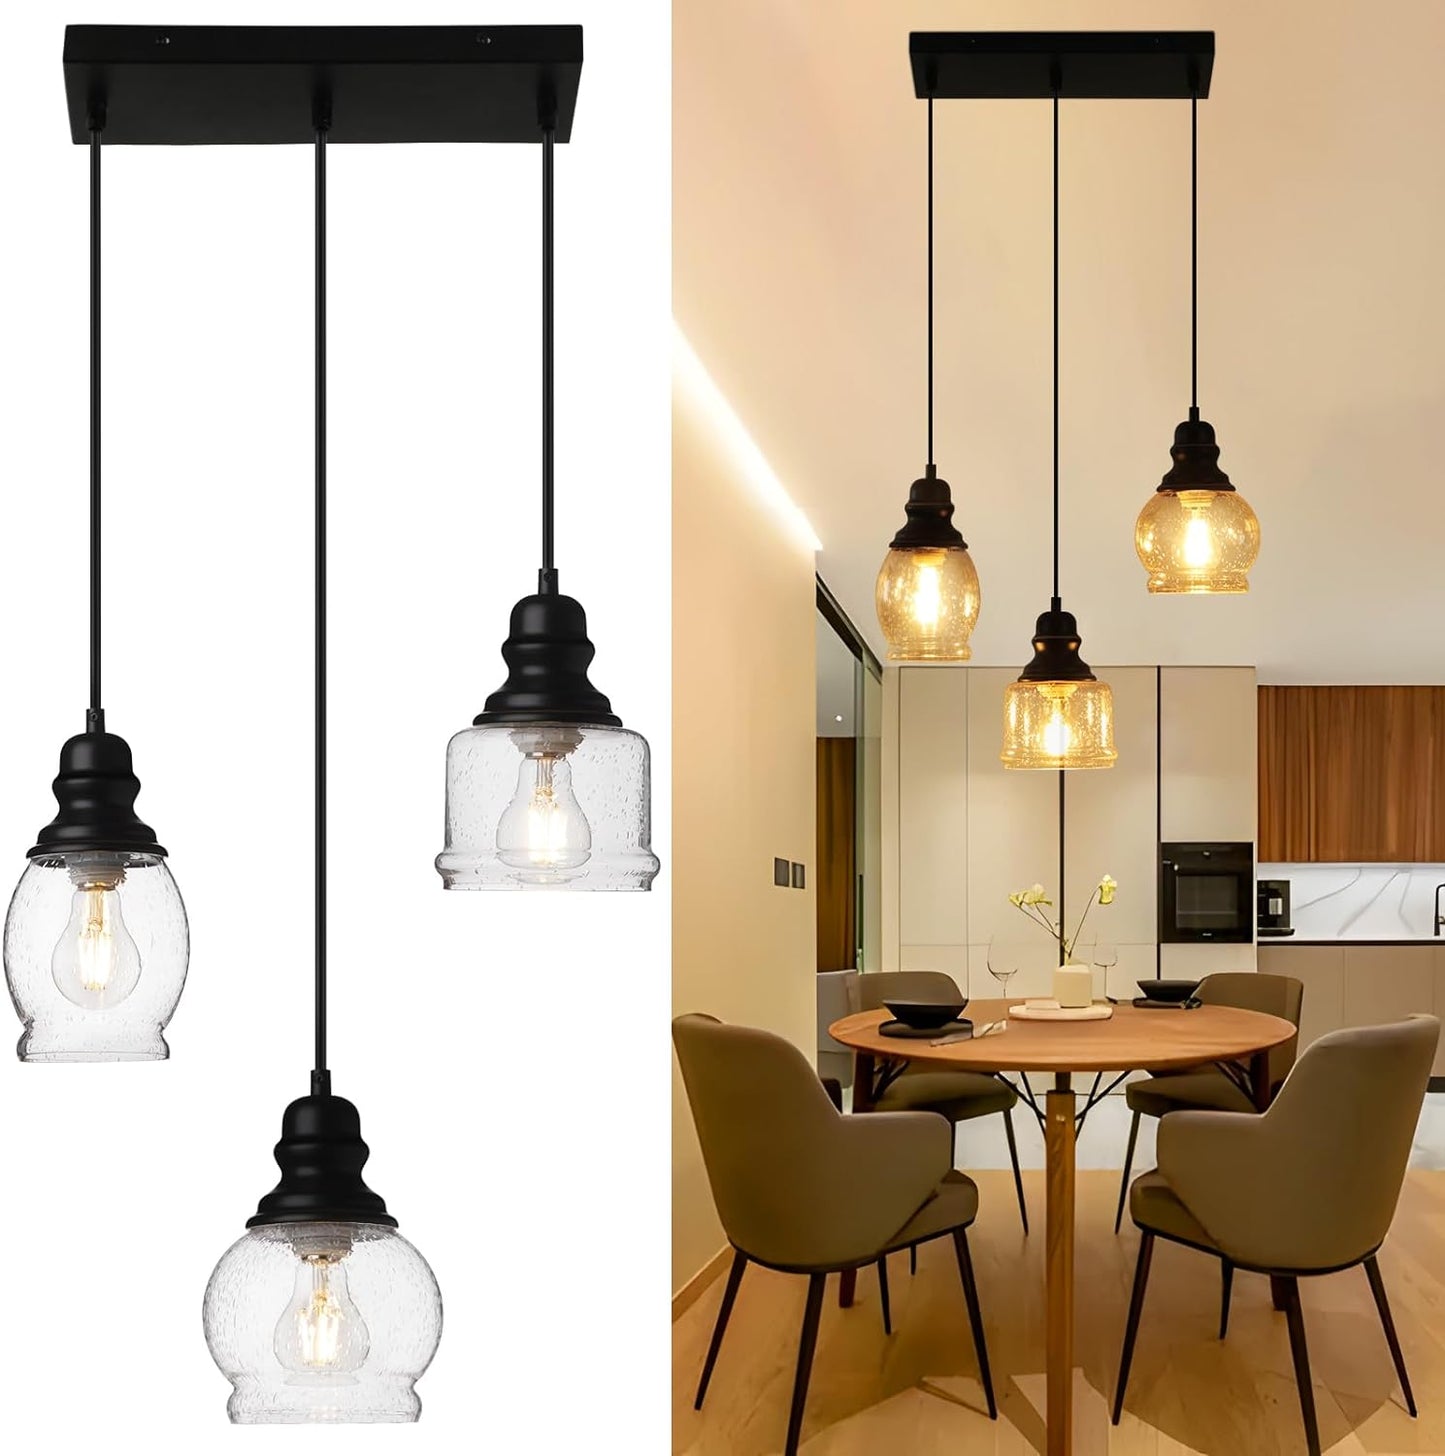 Industrial Pendant Lighting, Pendant Lights for Kitchen Island 3 Light Glass Pendant Light Fixture with Seeded Glass Shade, Adjustable Cord Farmhouse Ceiling Light Black Metal finish Linear Chandelier (Bl